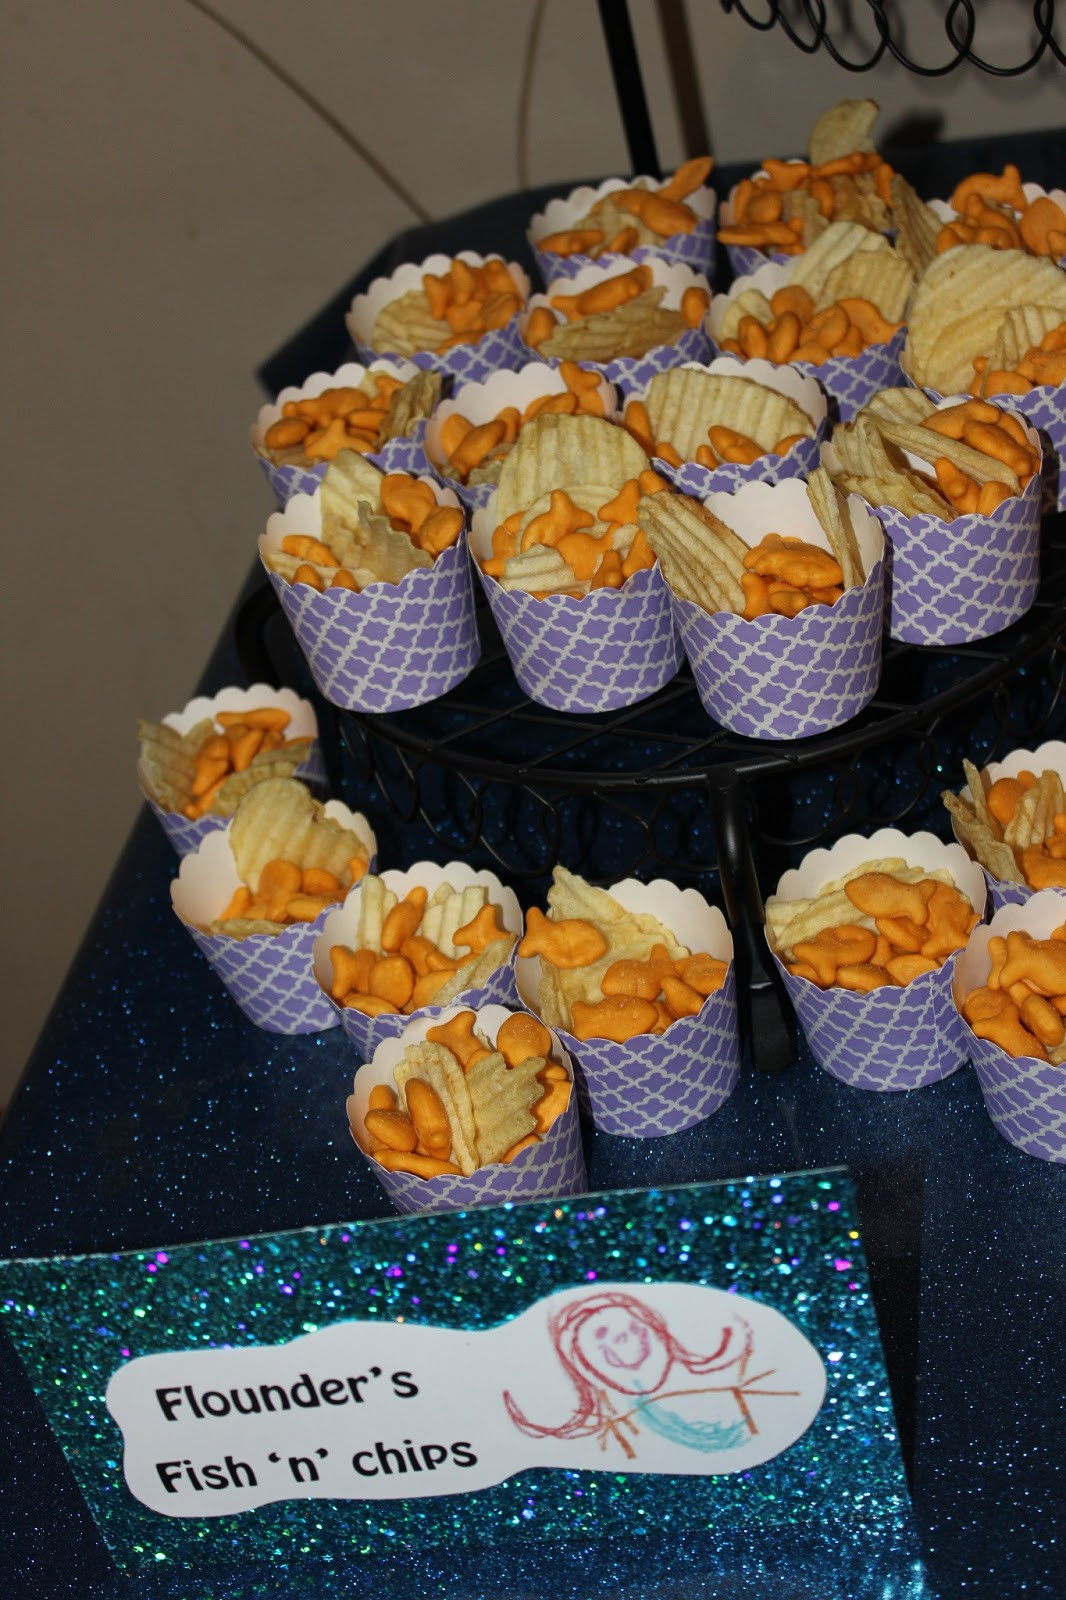 Little Mermaid Party Snack Ideas
 The House Family The Little Mermaid 4th Birthday